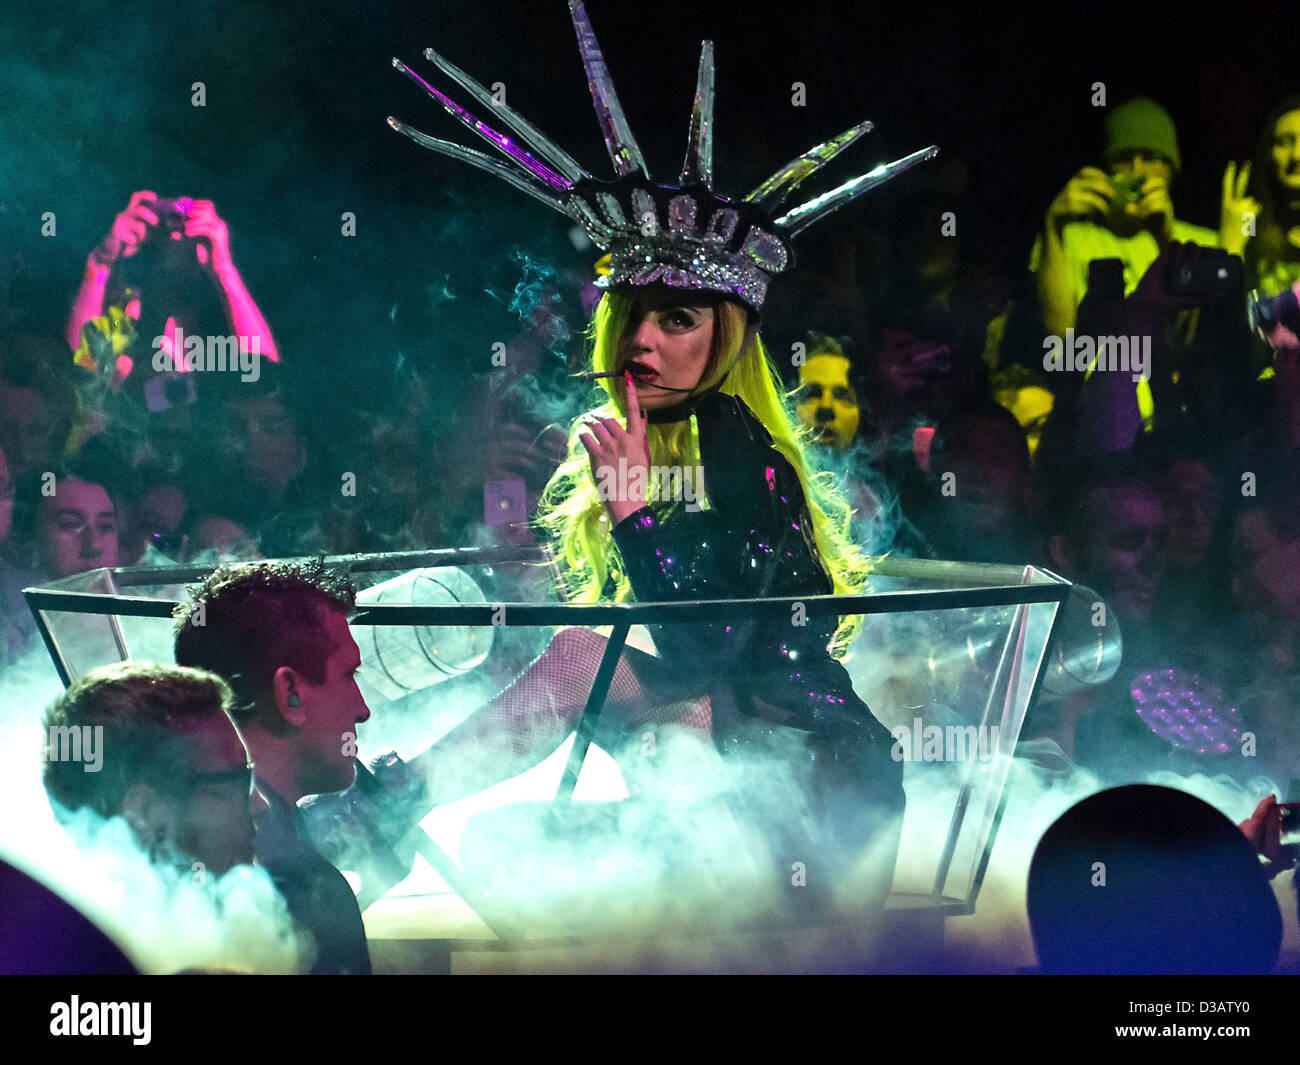 American Singer Lady Gaga Performs During Her Born This Way Ball Tour Stock Photo Alamy